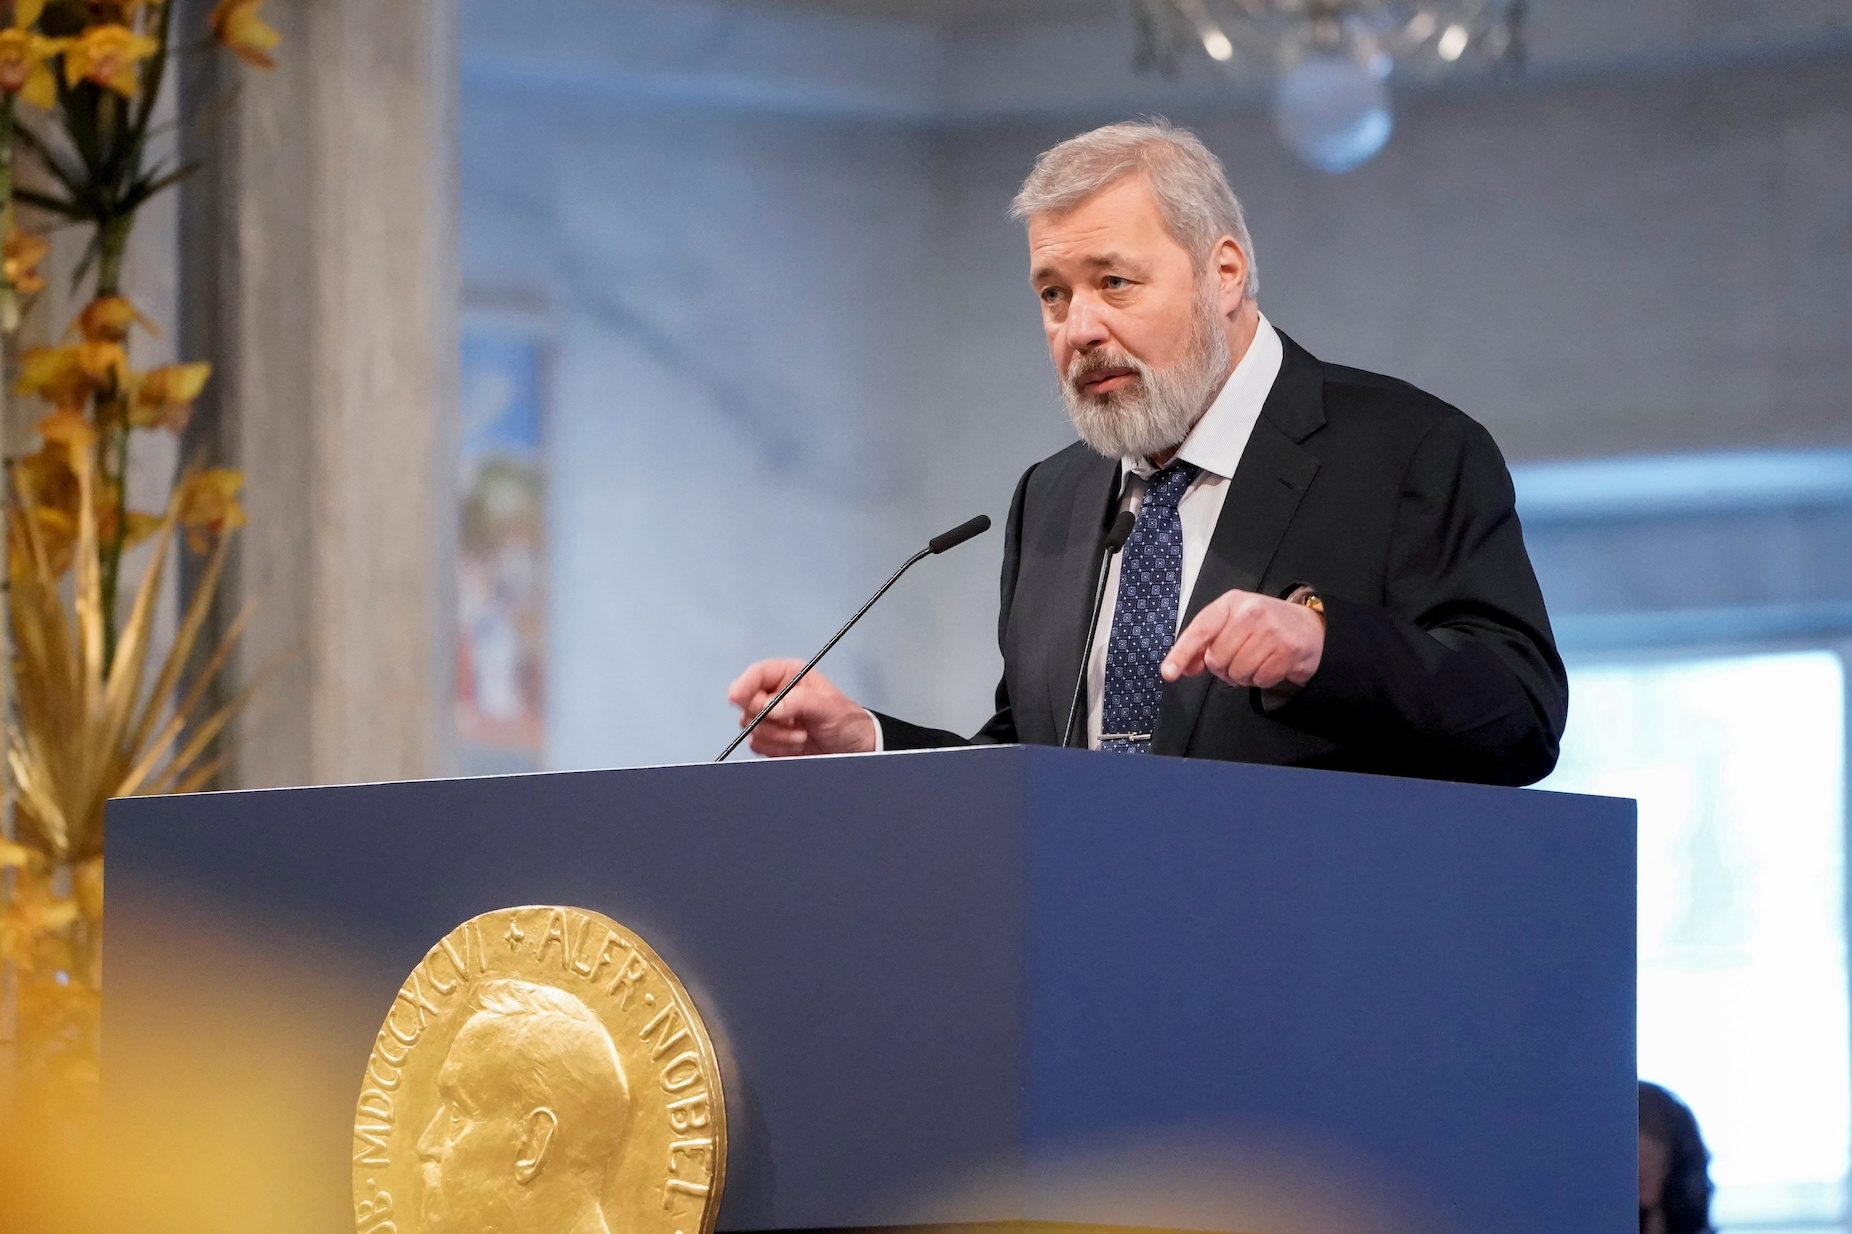 Dmitry Muratov, leader of Russia’s Nobel Prize newsroom, knows who the enemy is